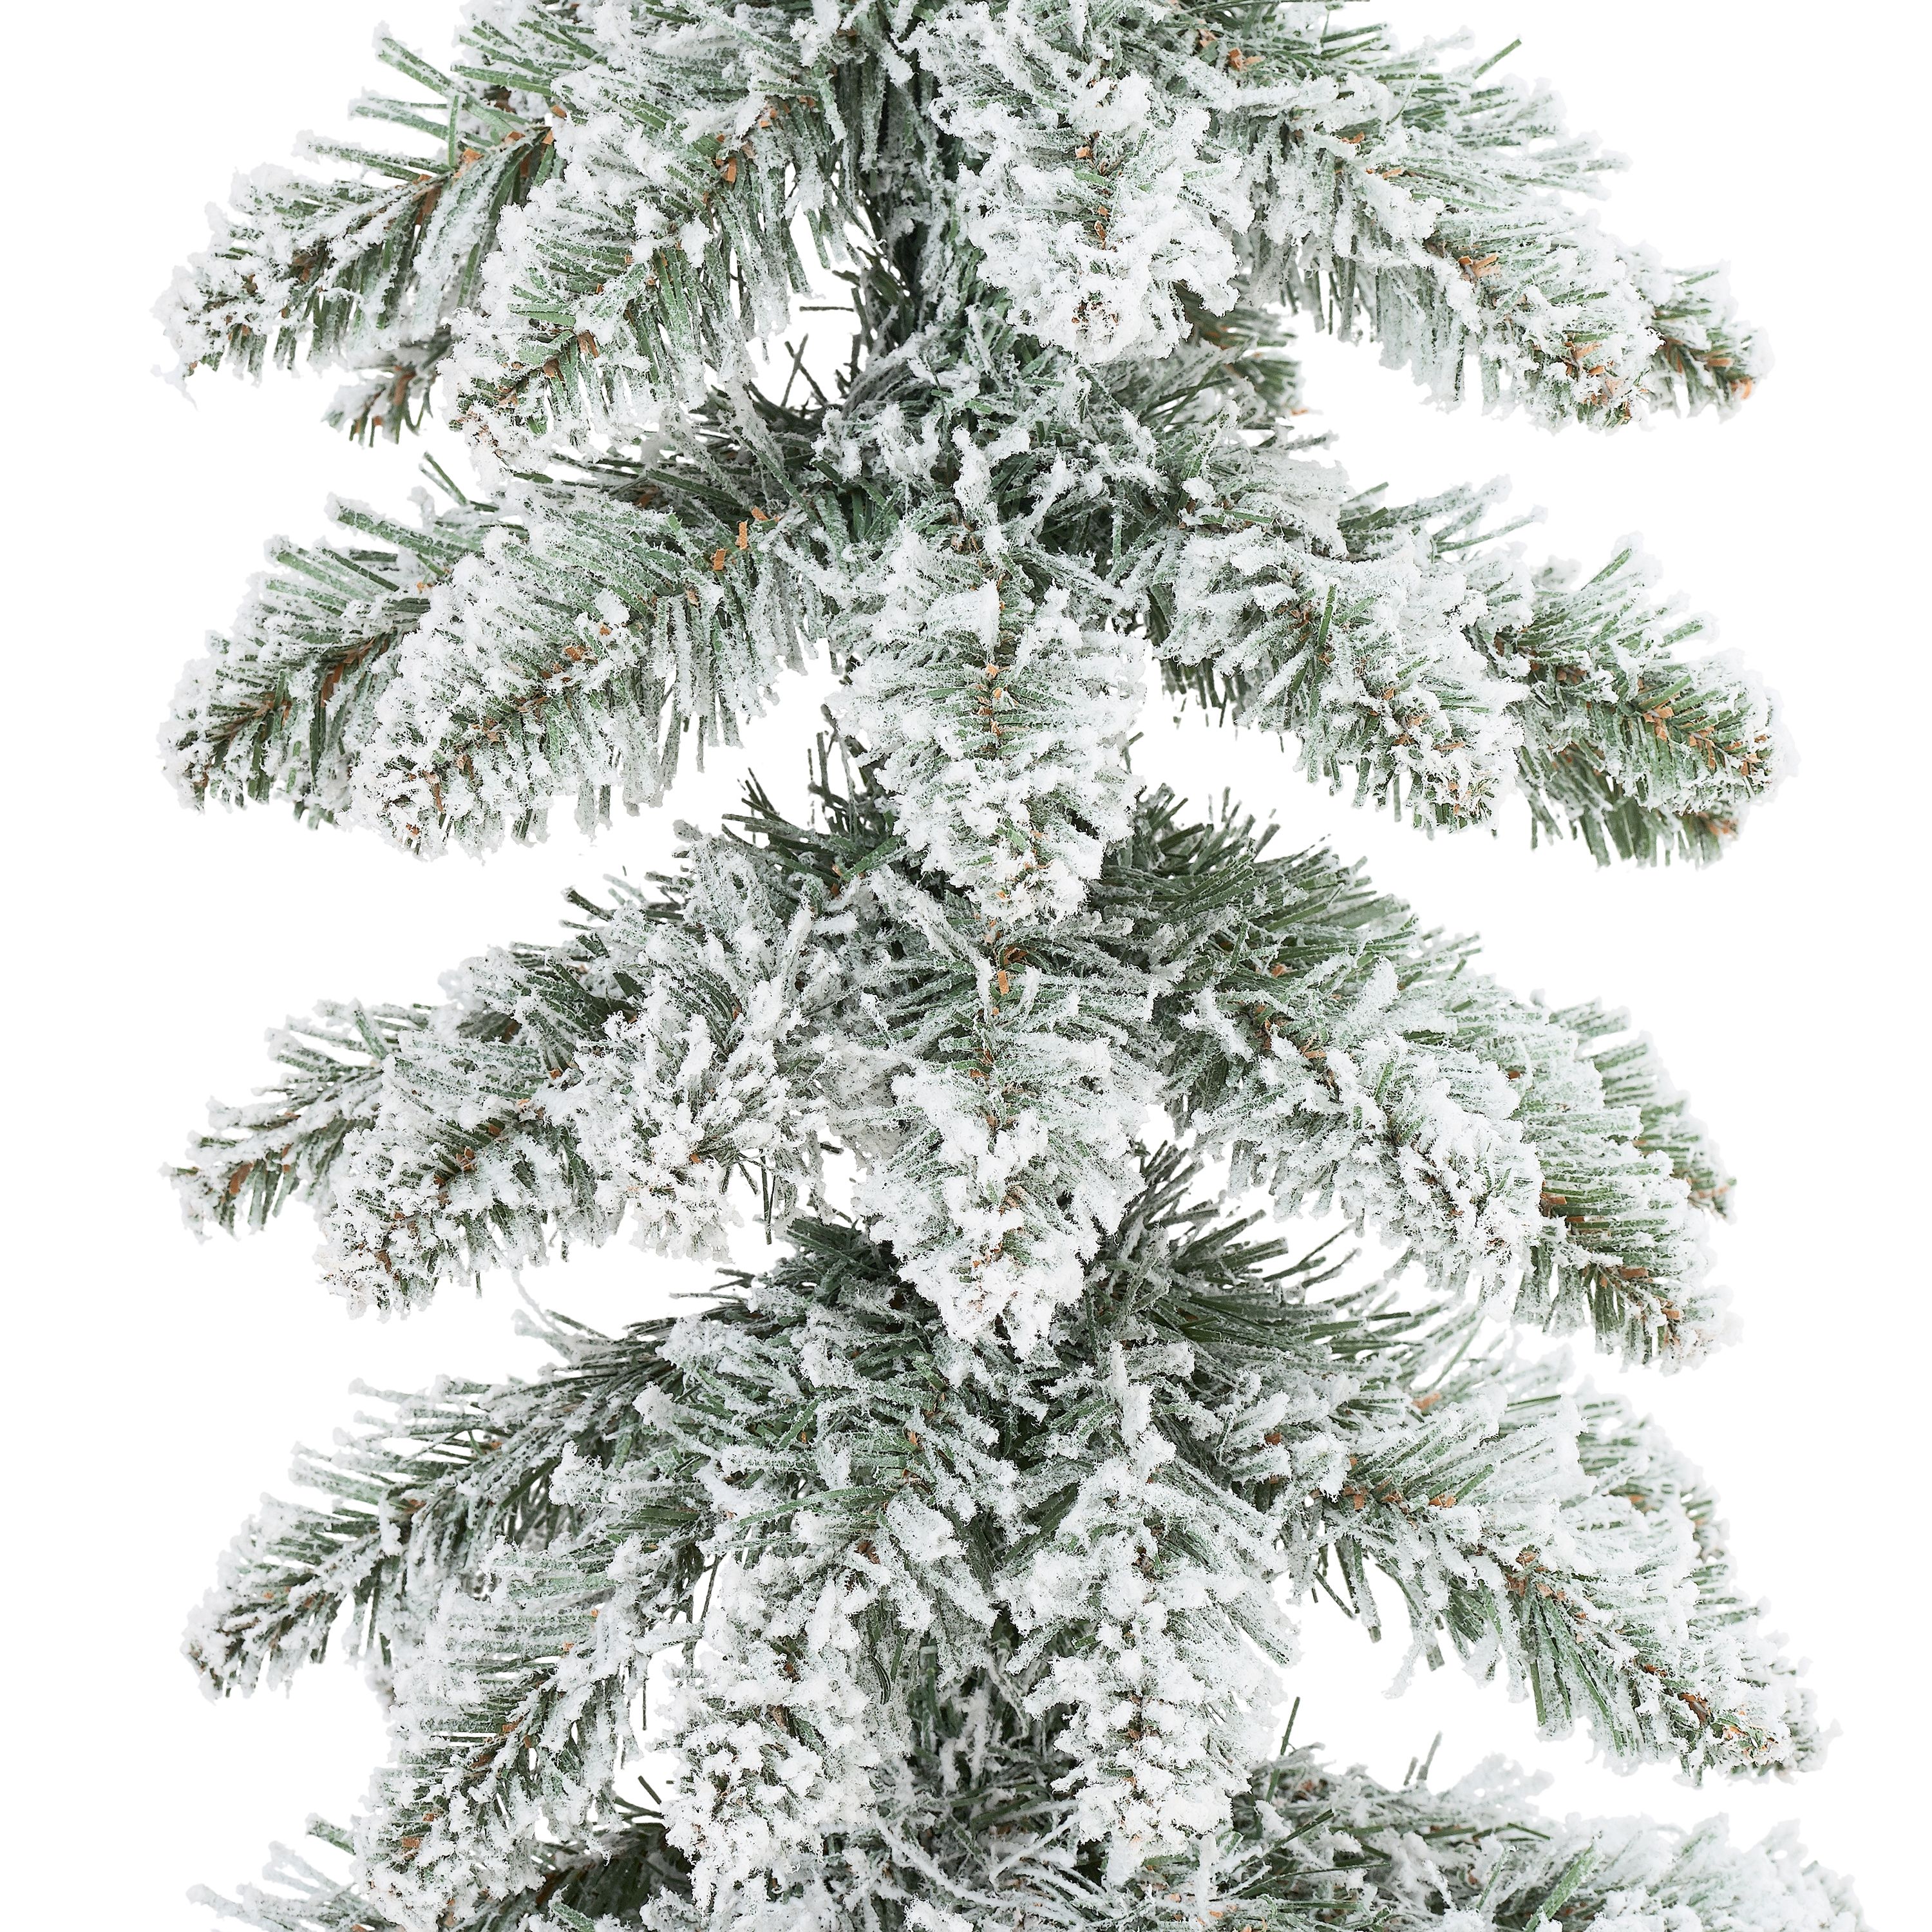 Holiday Time Flocked Pine Tree with Galvanized Bucket Set of 3 - image 3 of 6